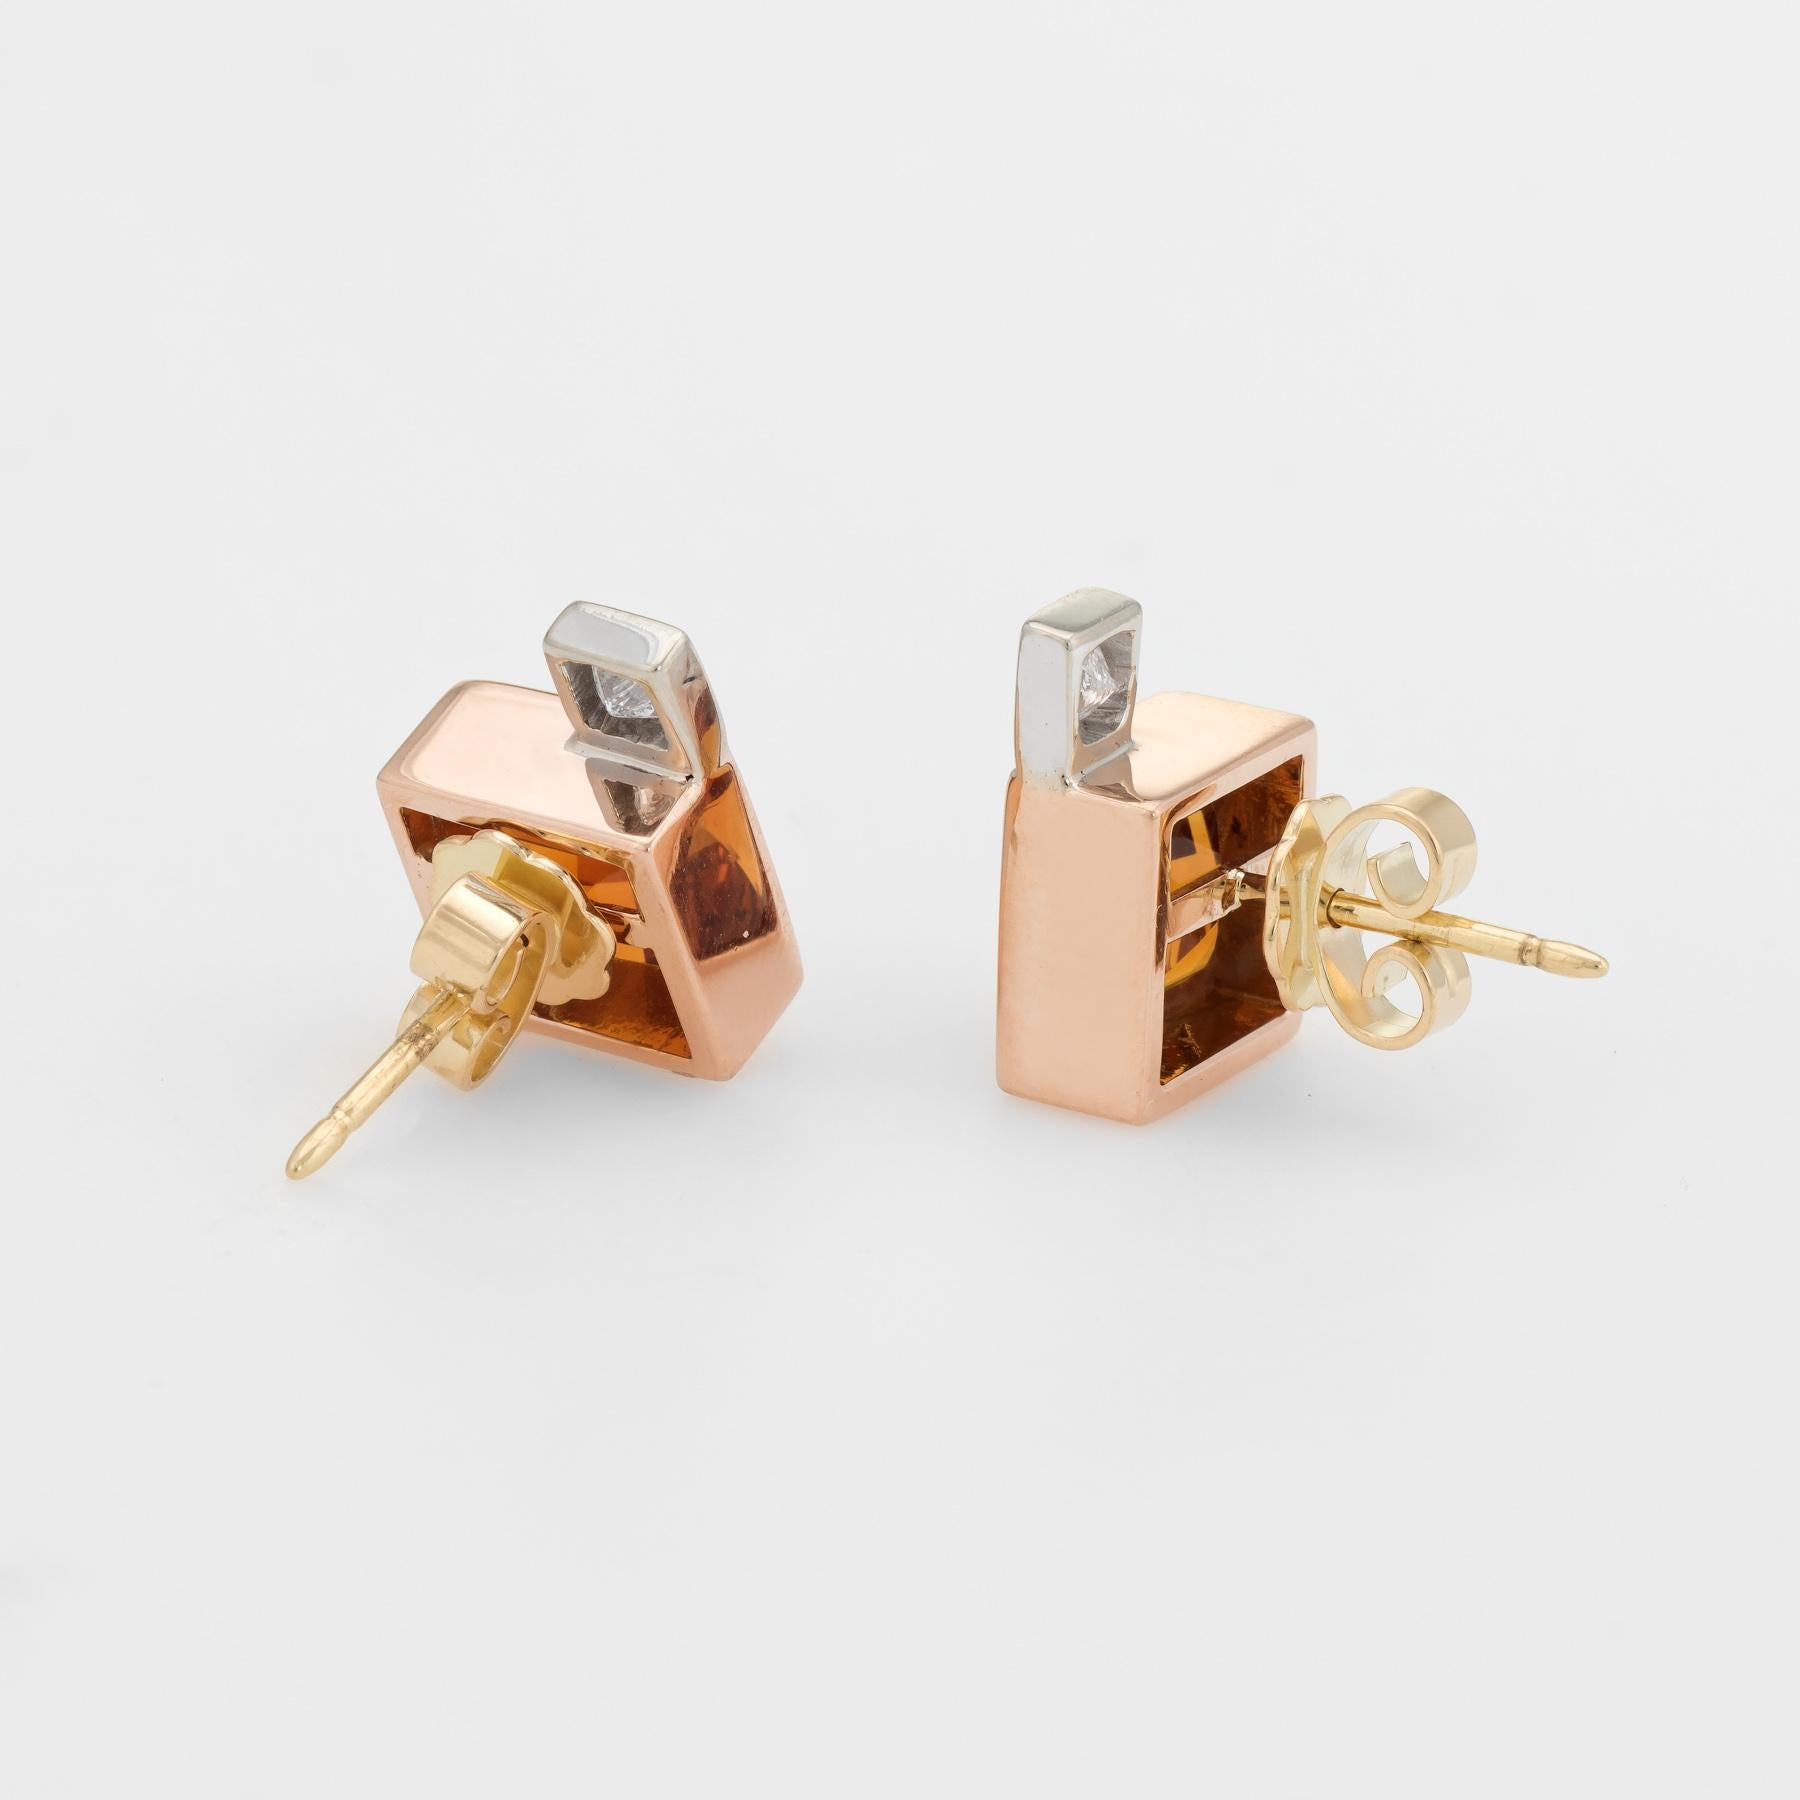 Elegant pair of vintage square stud earrings, crafted in 18k yellow gold. 

Checkerboard faceted citrine measures 8mm diameter (estimated at 2.50 carats each - 5 carats total estimated weight), accented with two estimated 0.15 carat princess cut